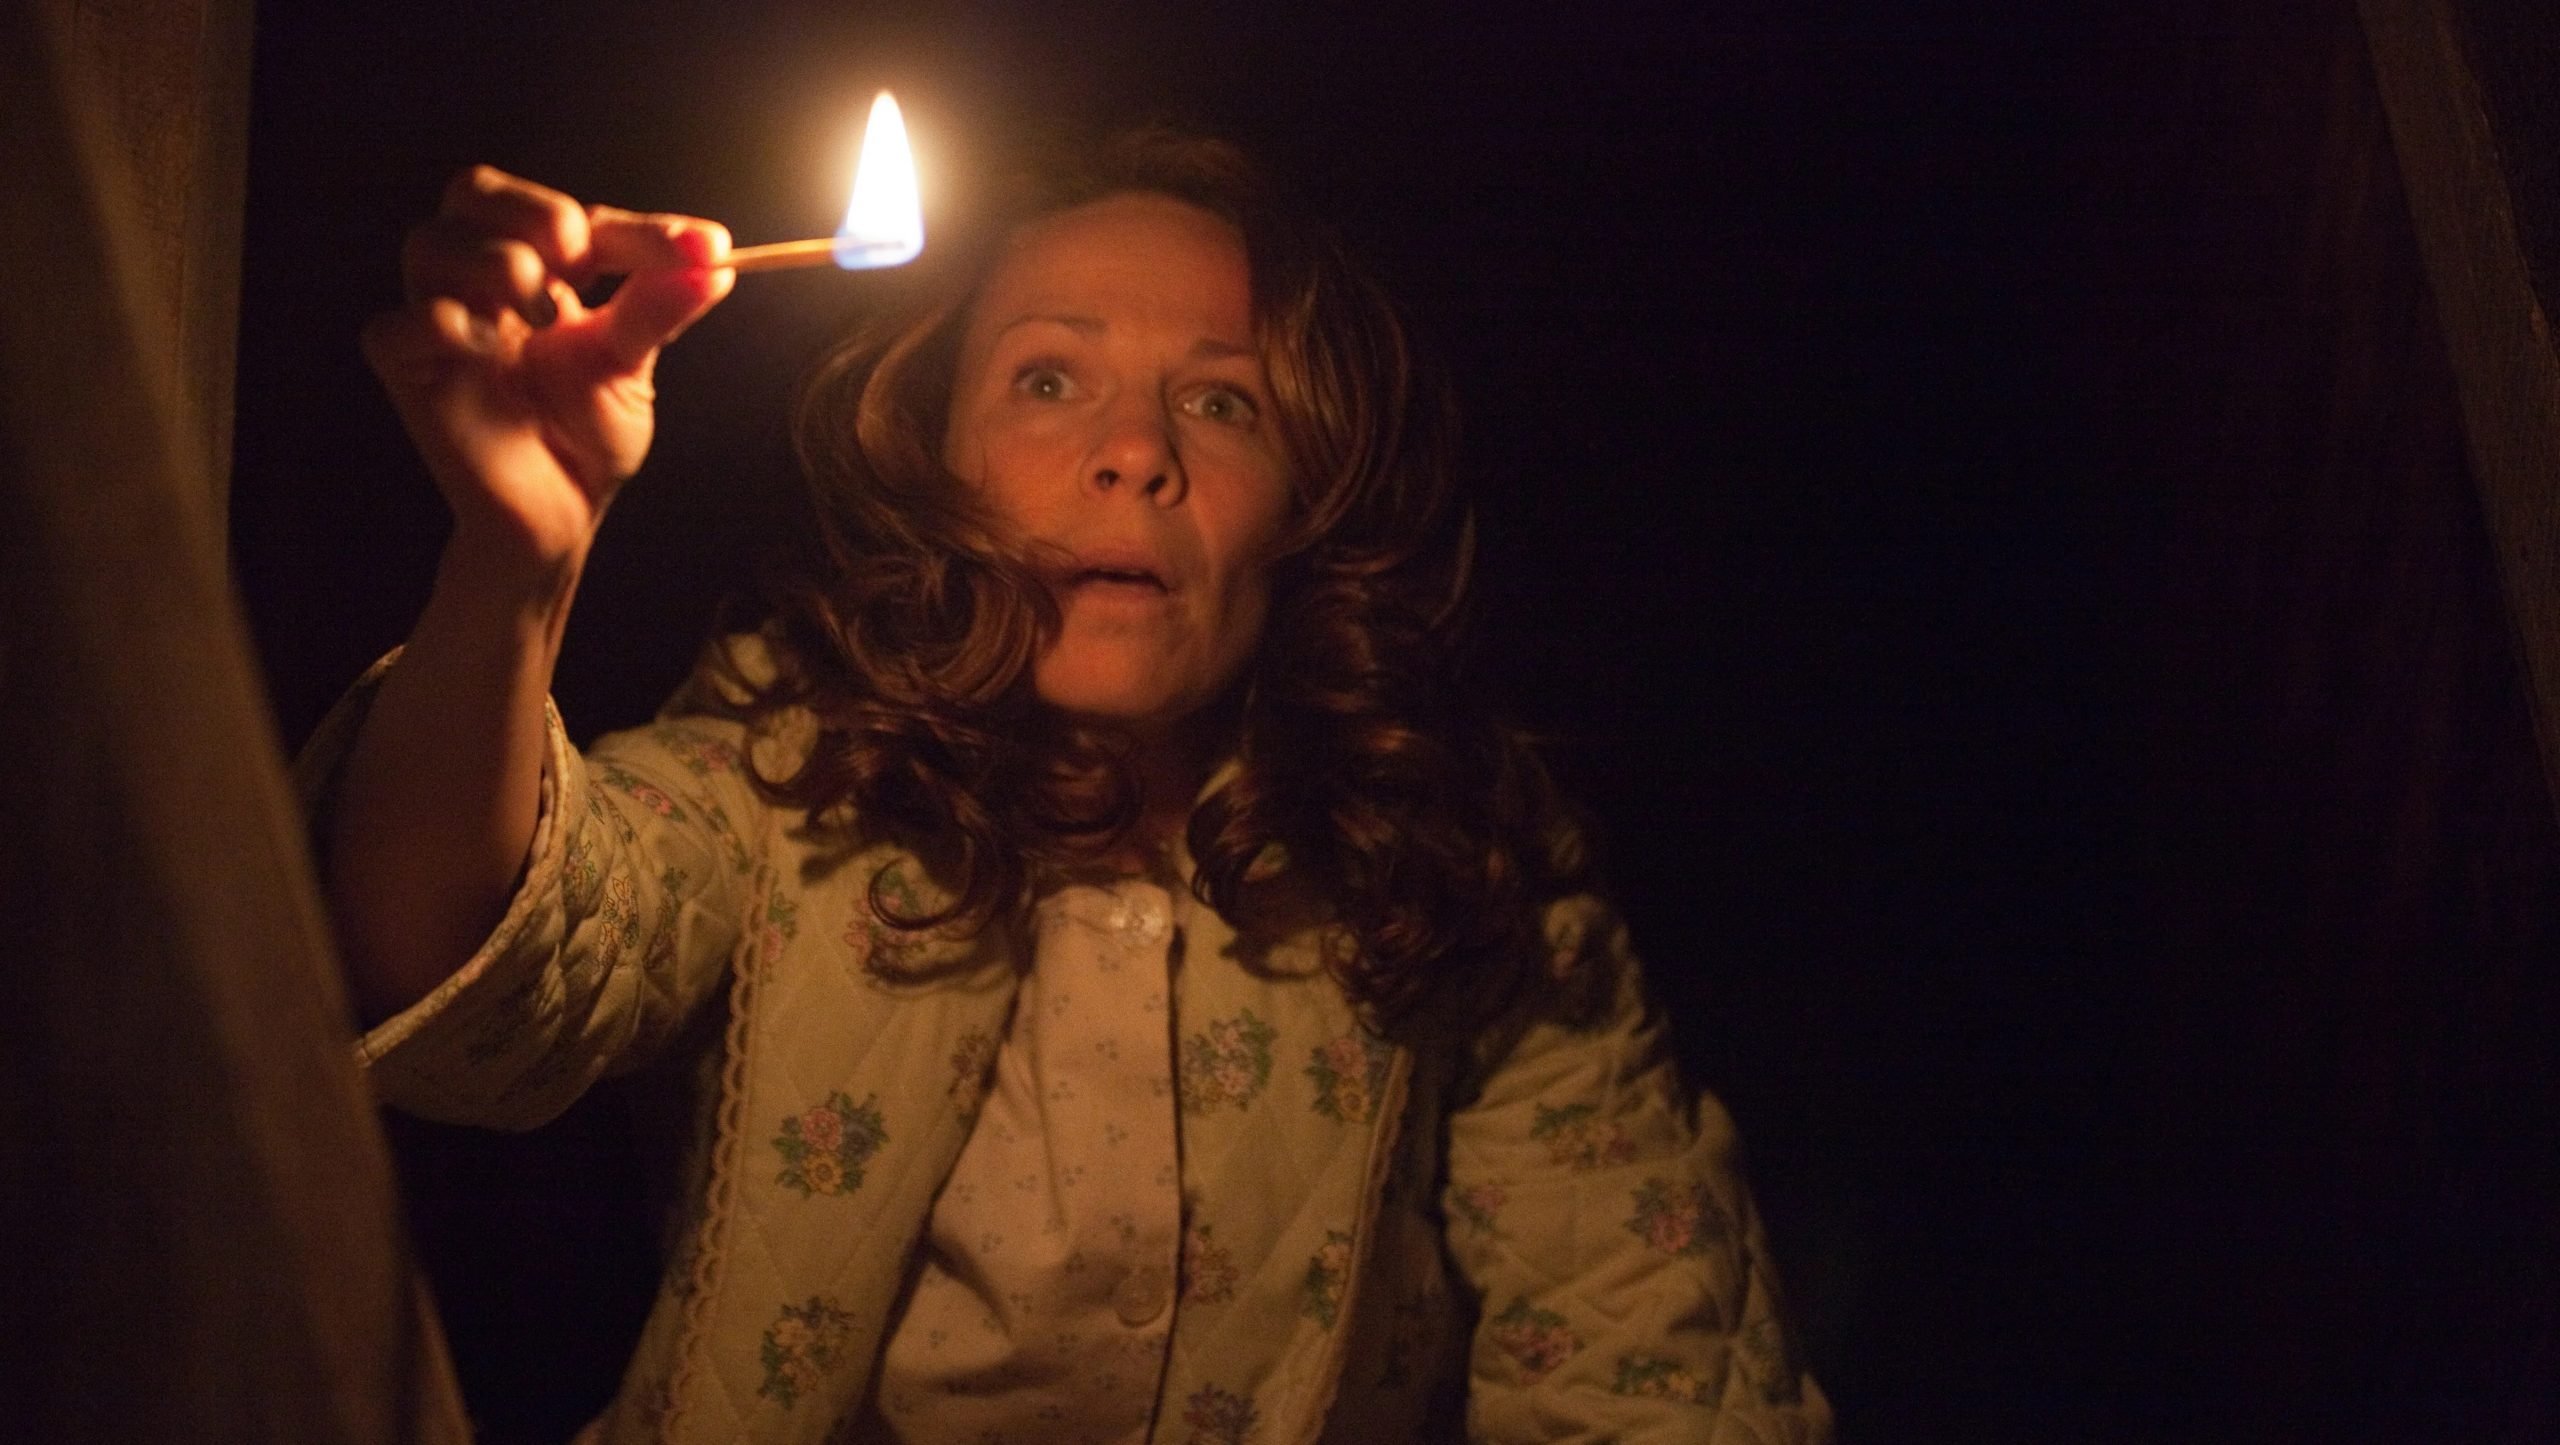 'The Conjuring': A Deep Dive Into Its Subversive Elements